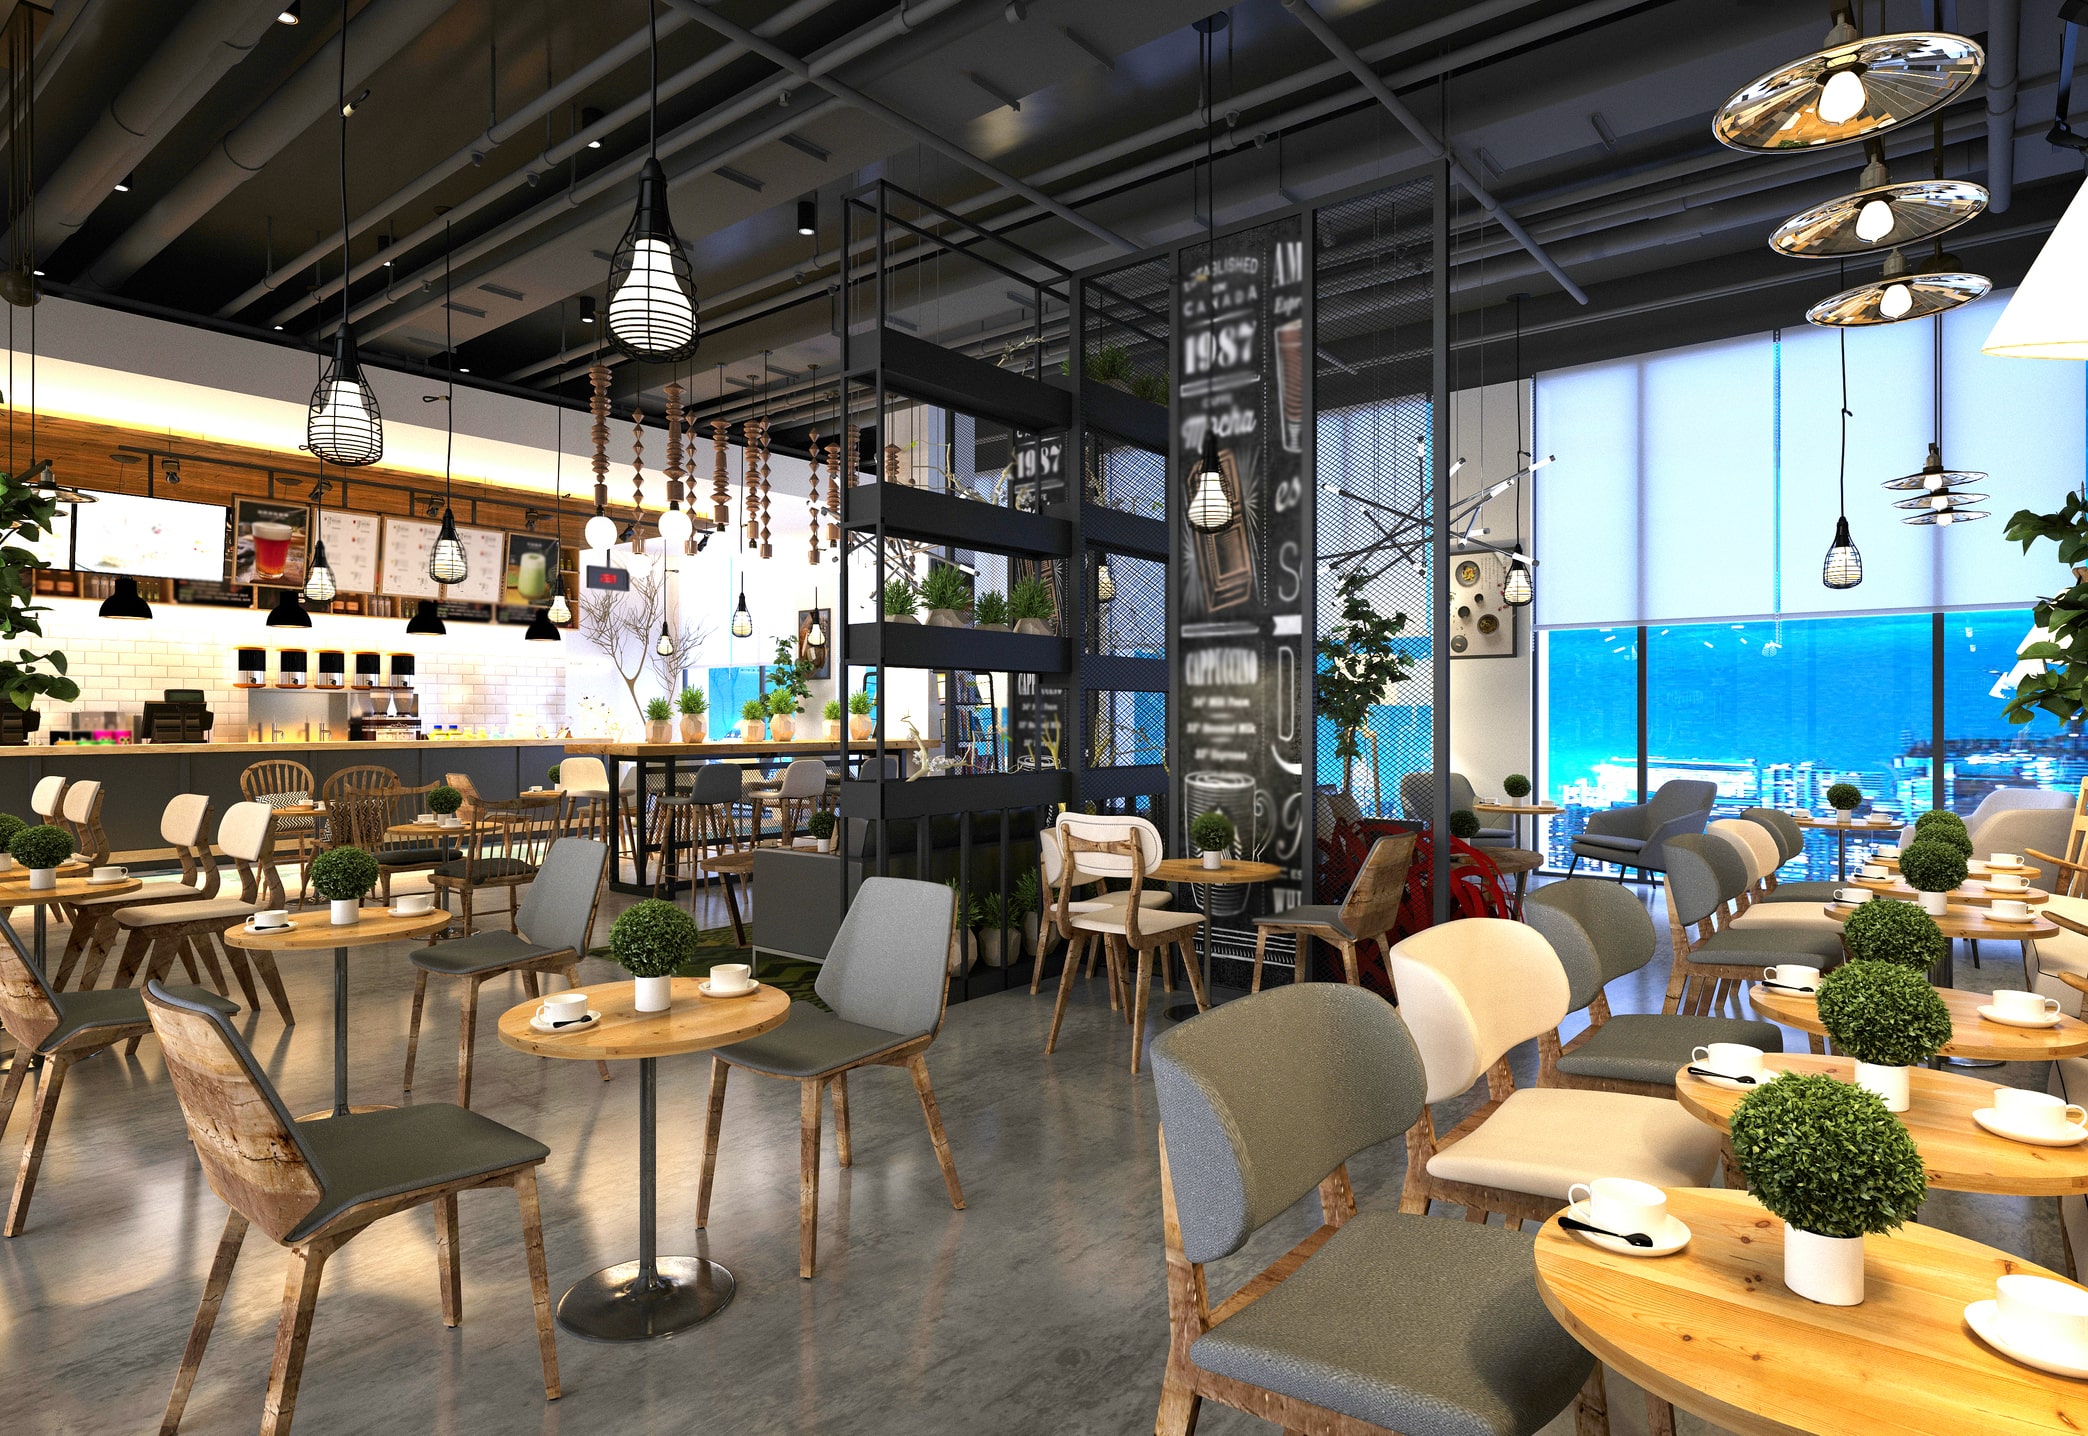 The interior of a modern restaurant with a seaside view